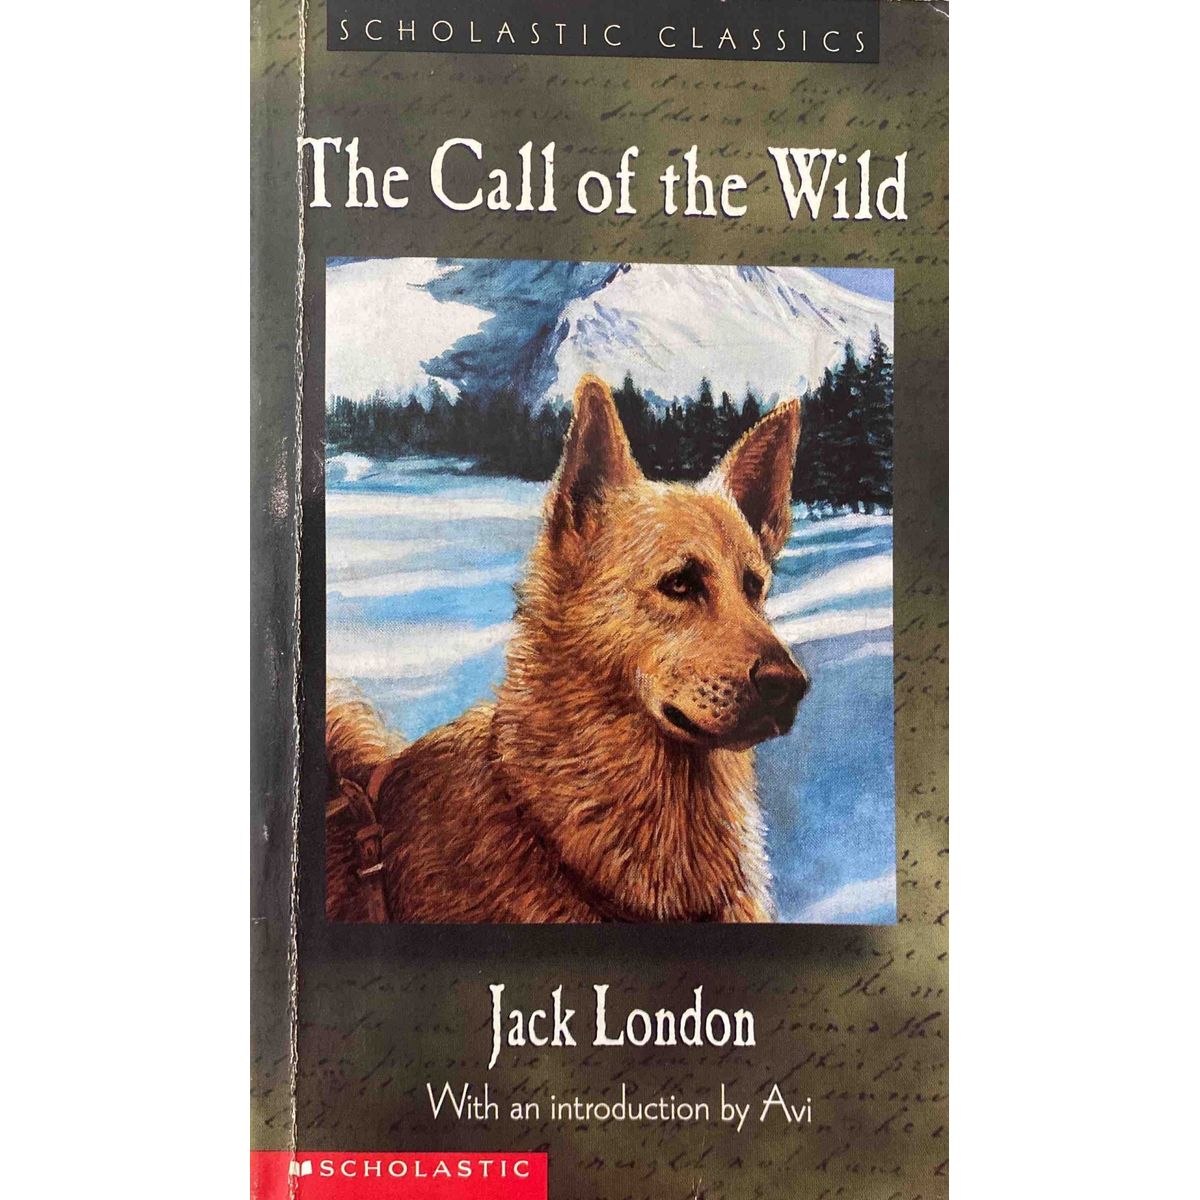 ISBN: 9780439227148 / 0439227143 - The Call of the Wild by Jack London [2001]